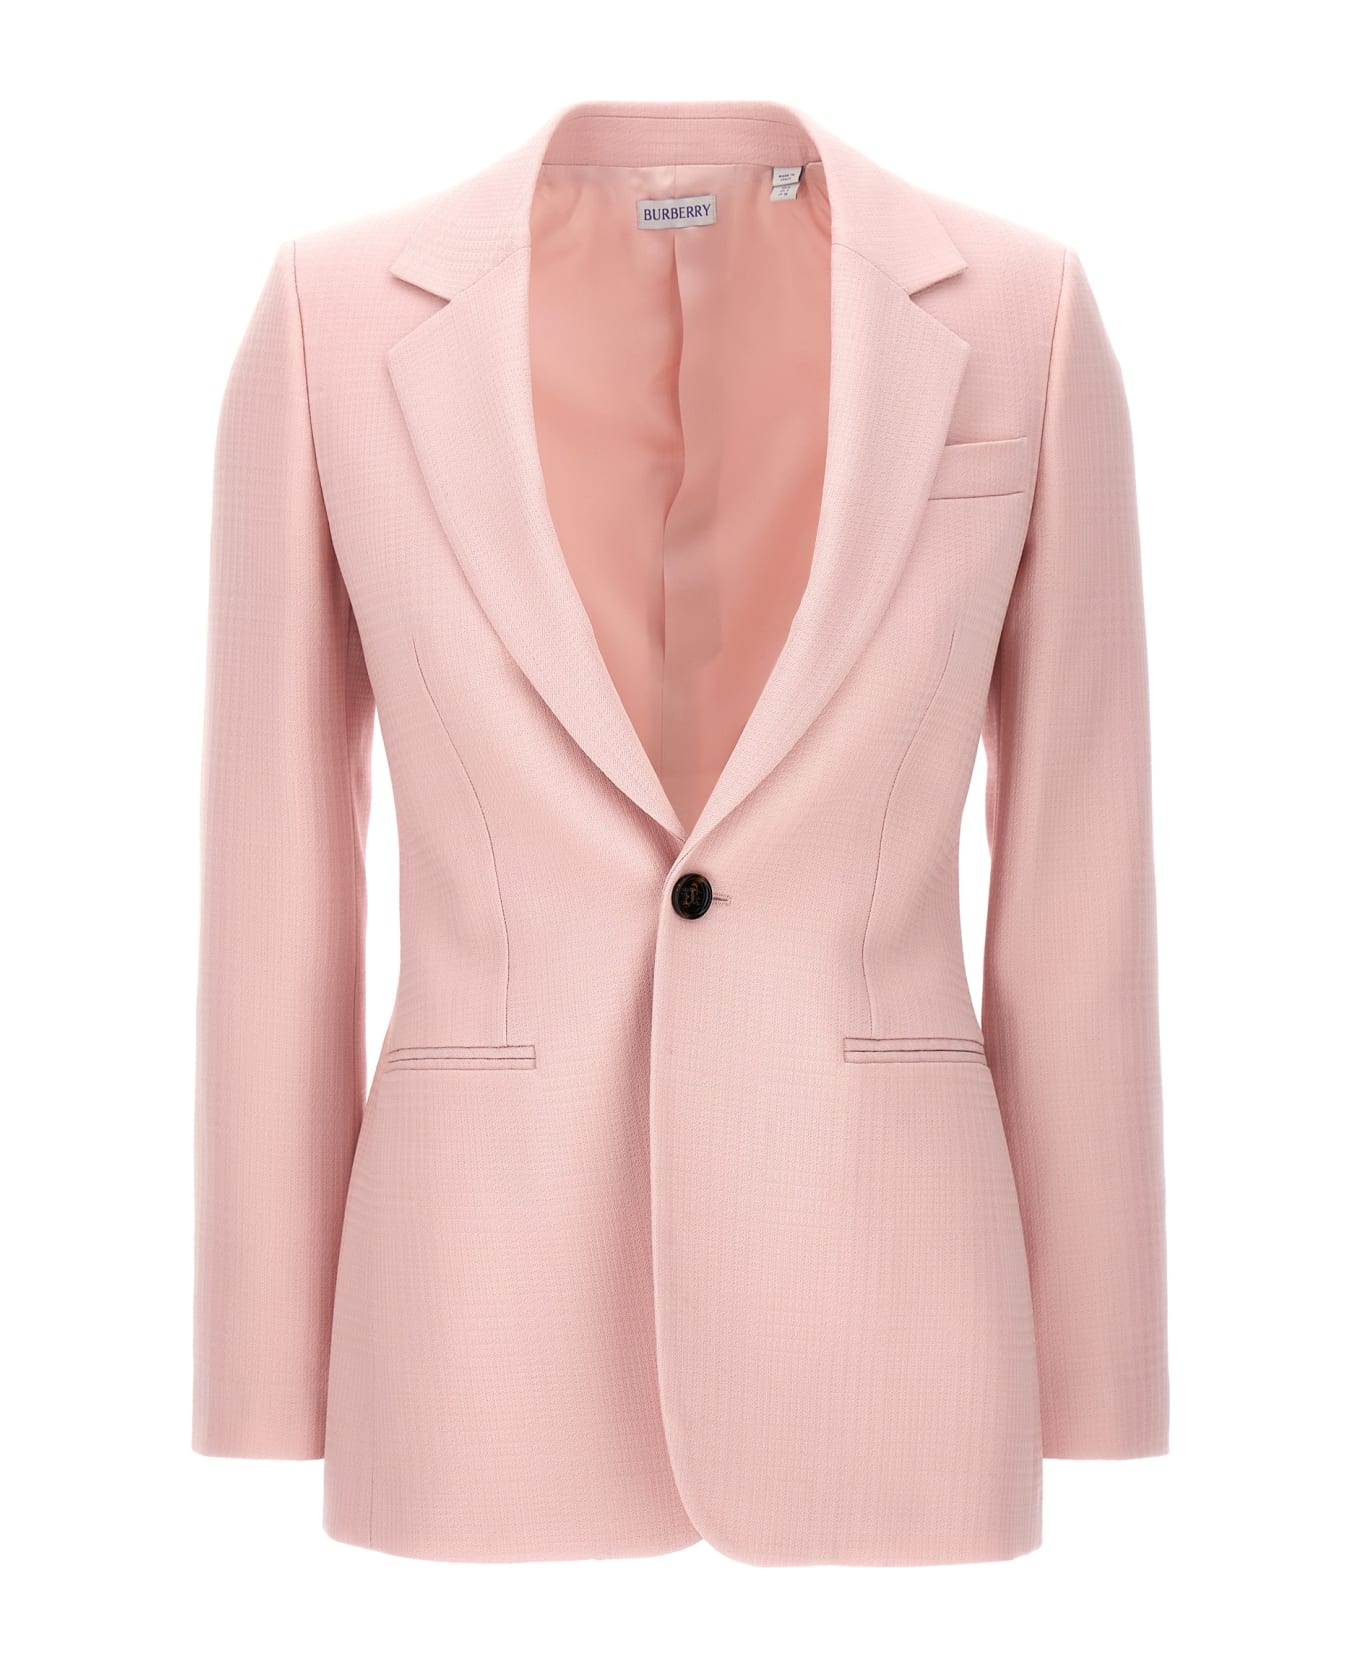 Burberry Single-breasted Tailored Blazer - Pink ブレザー